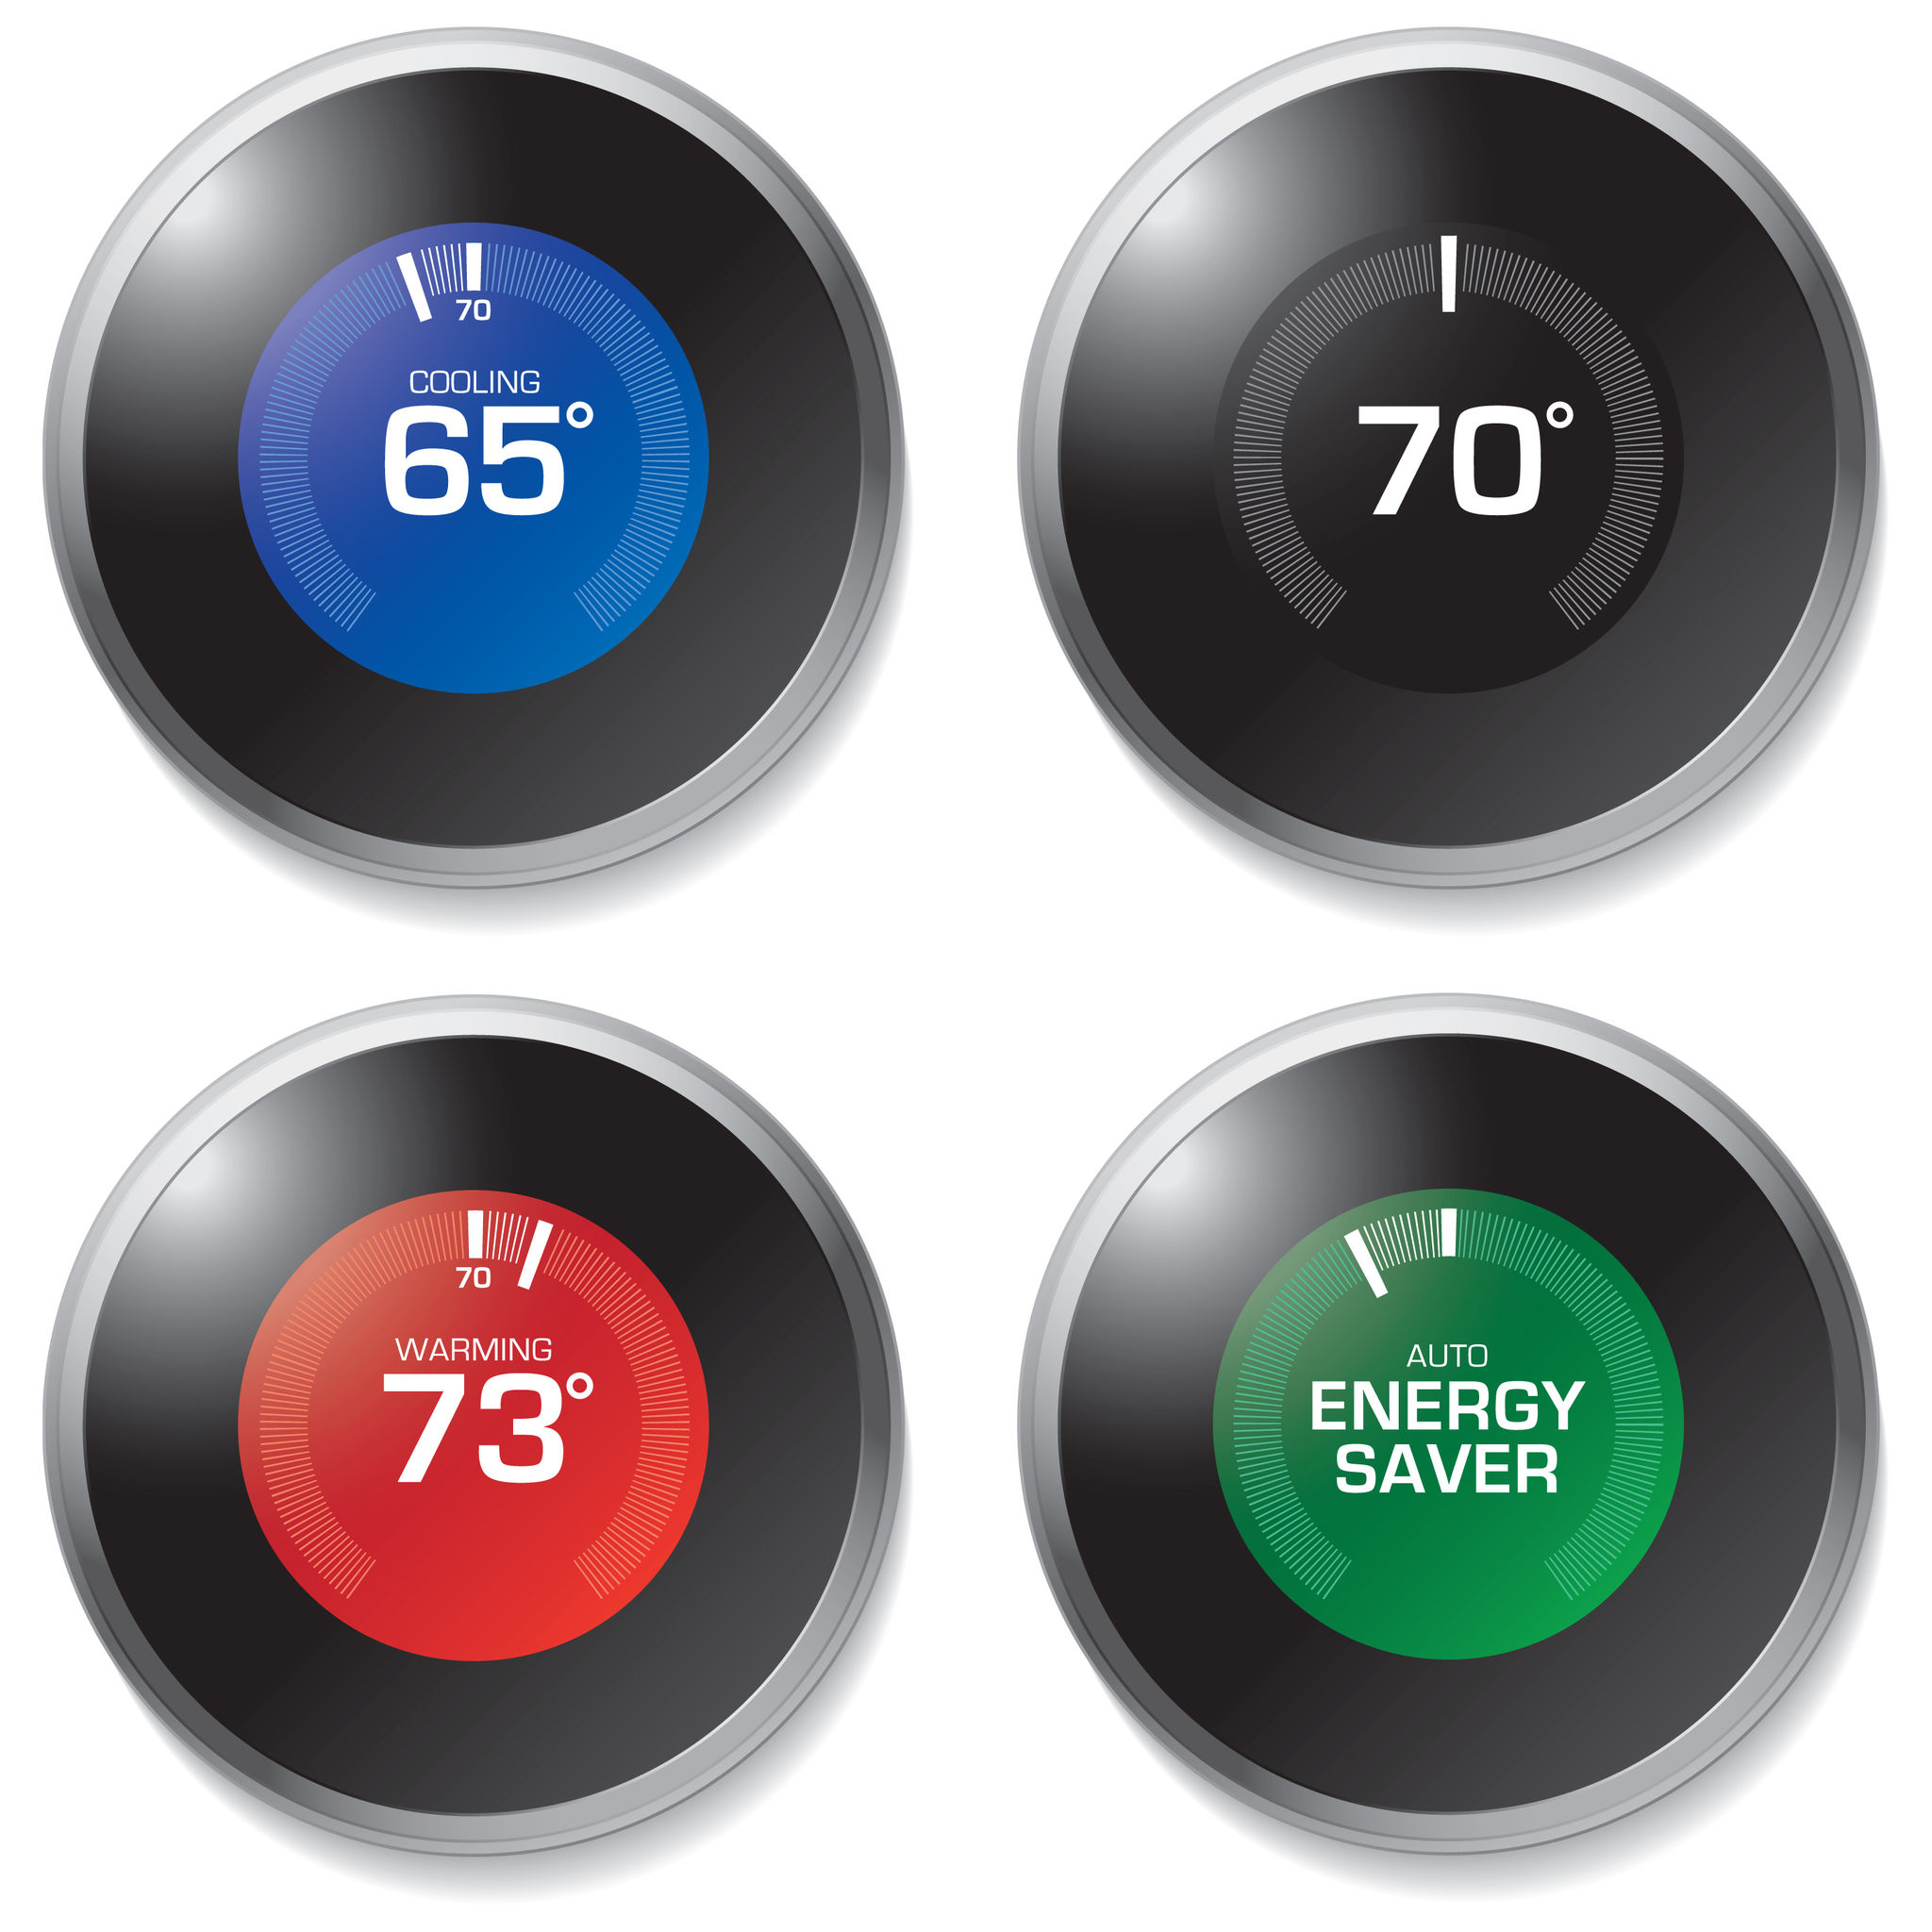 models of Nest Learning Thermostat